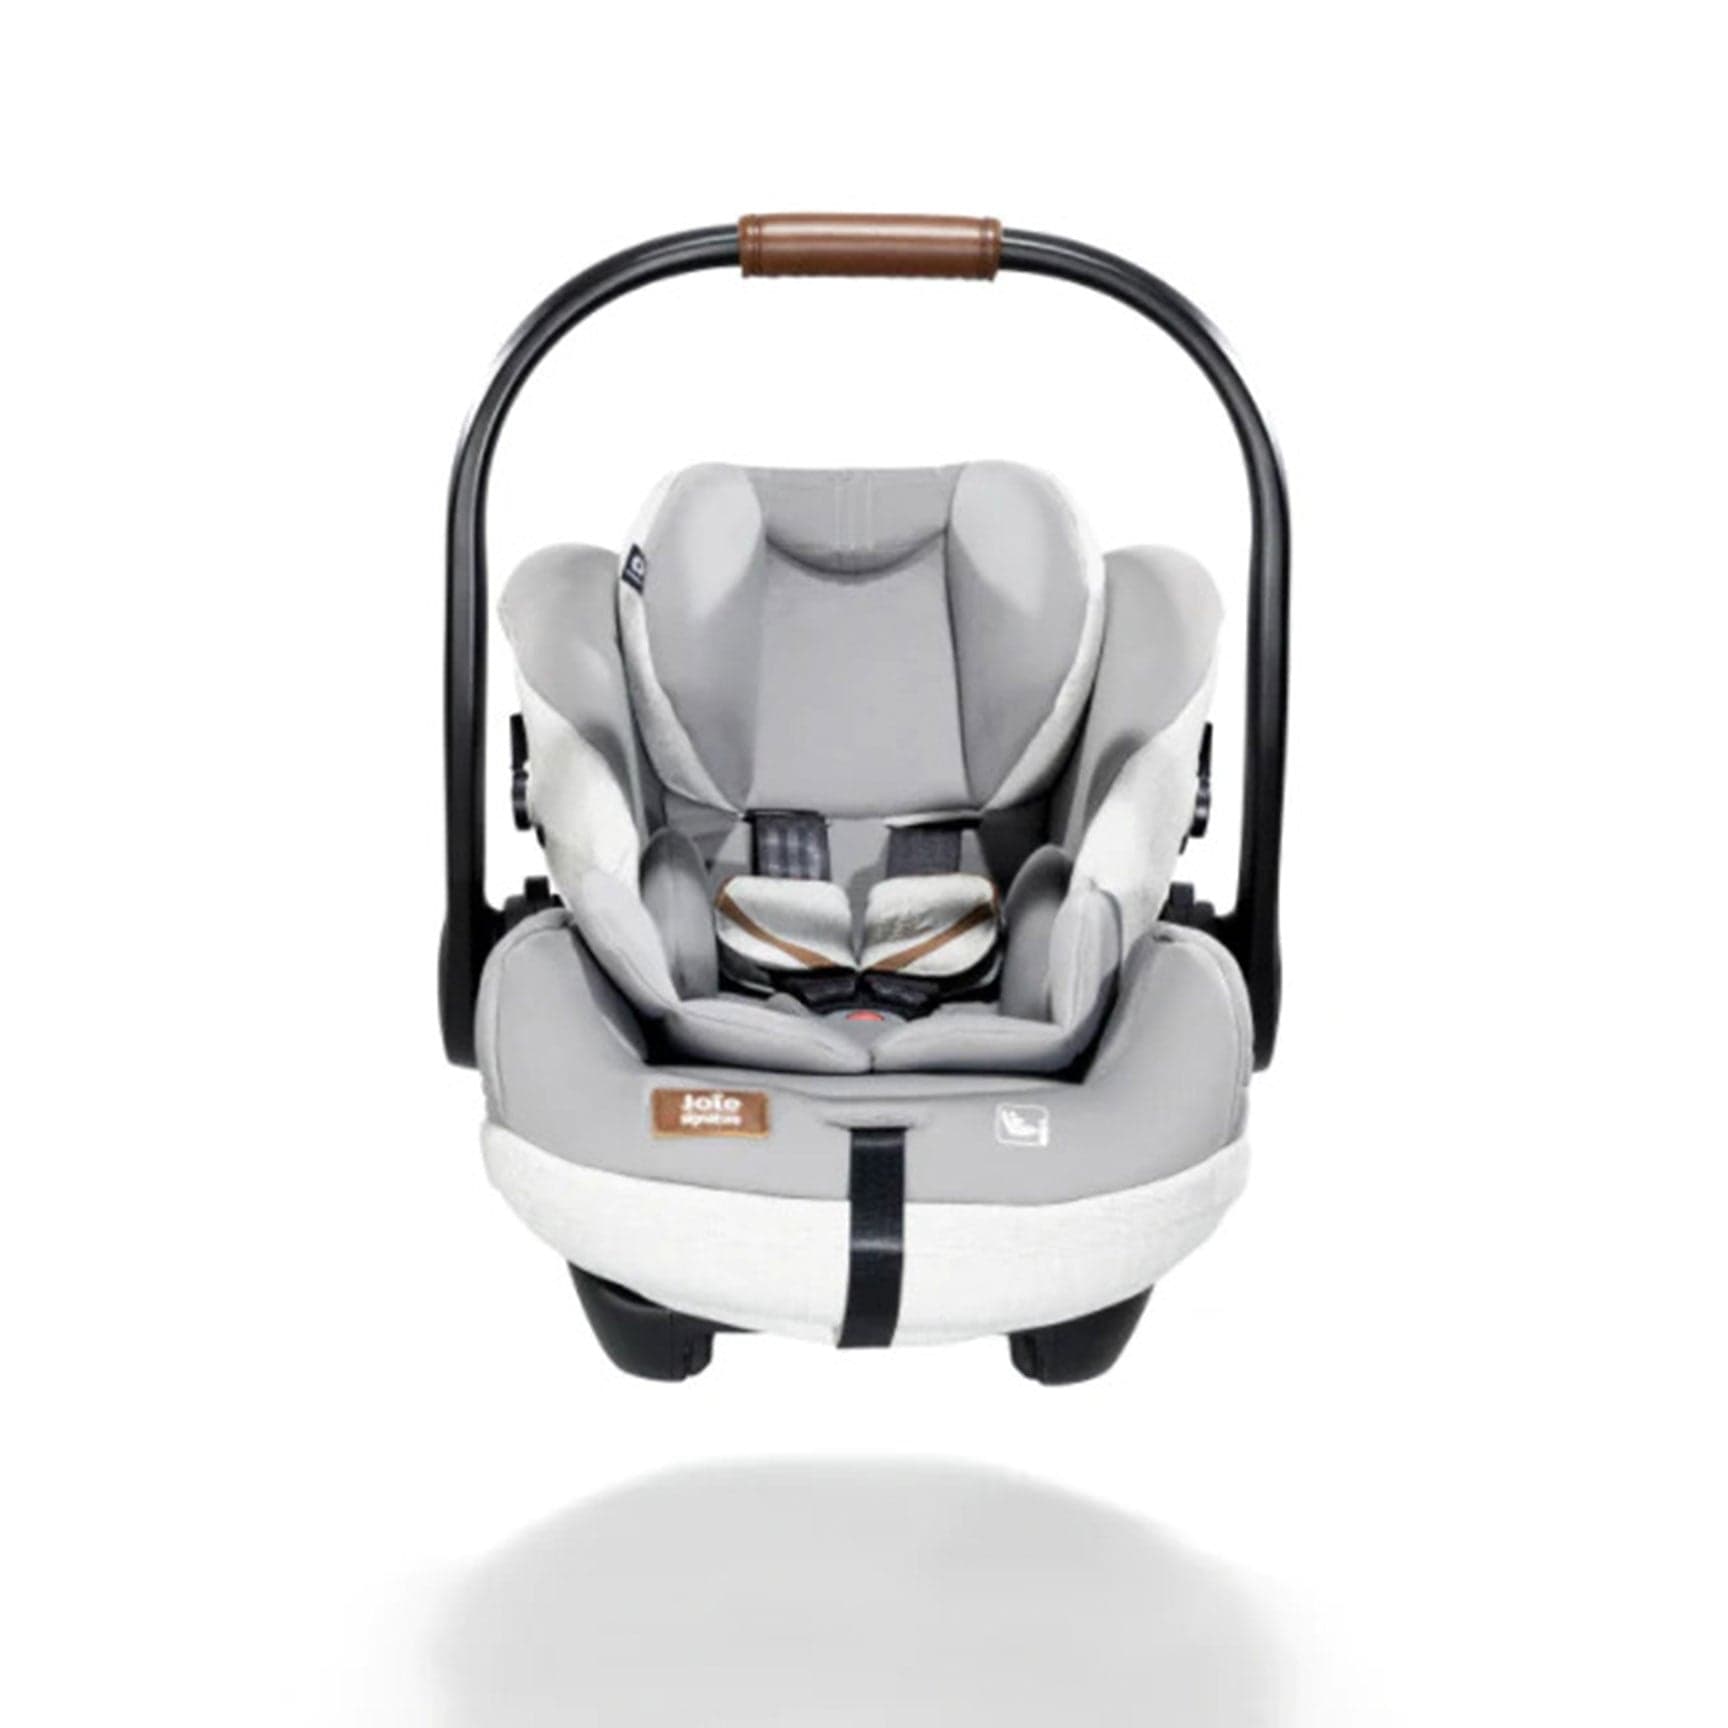 Joie baby car seats Joie i-Level Recline Signature Car Seat - Oyster C1510GAOYS000